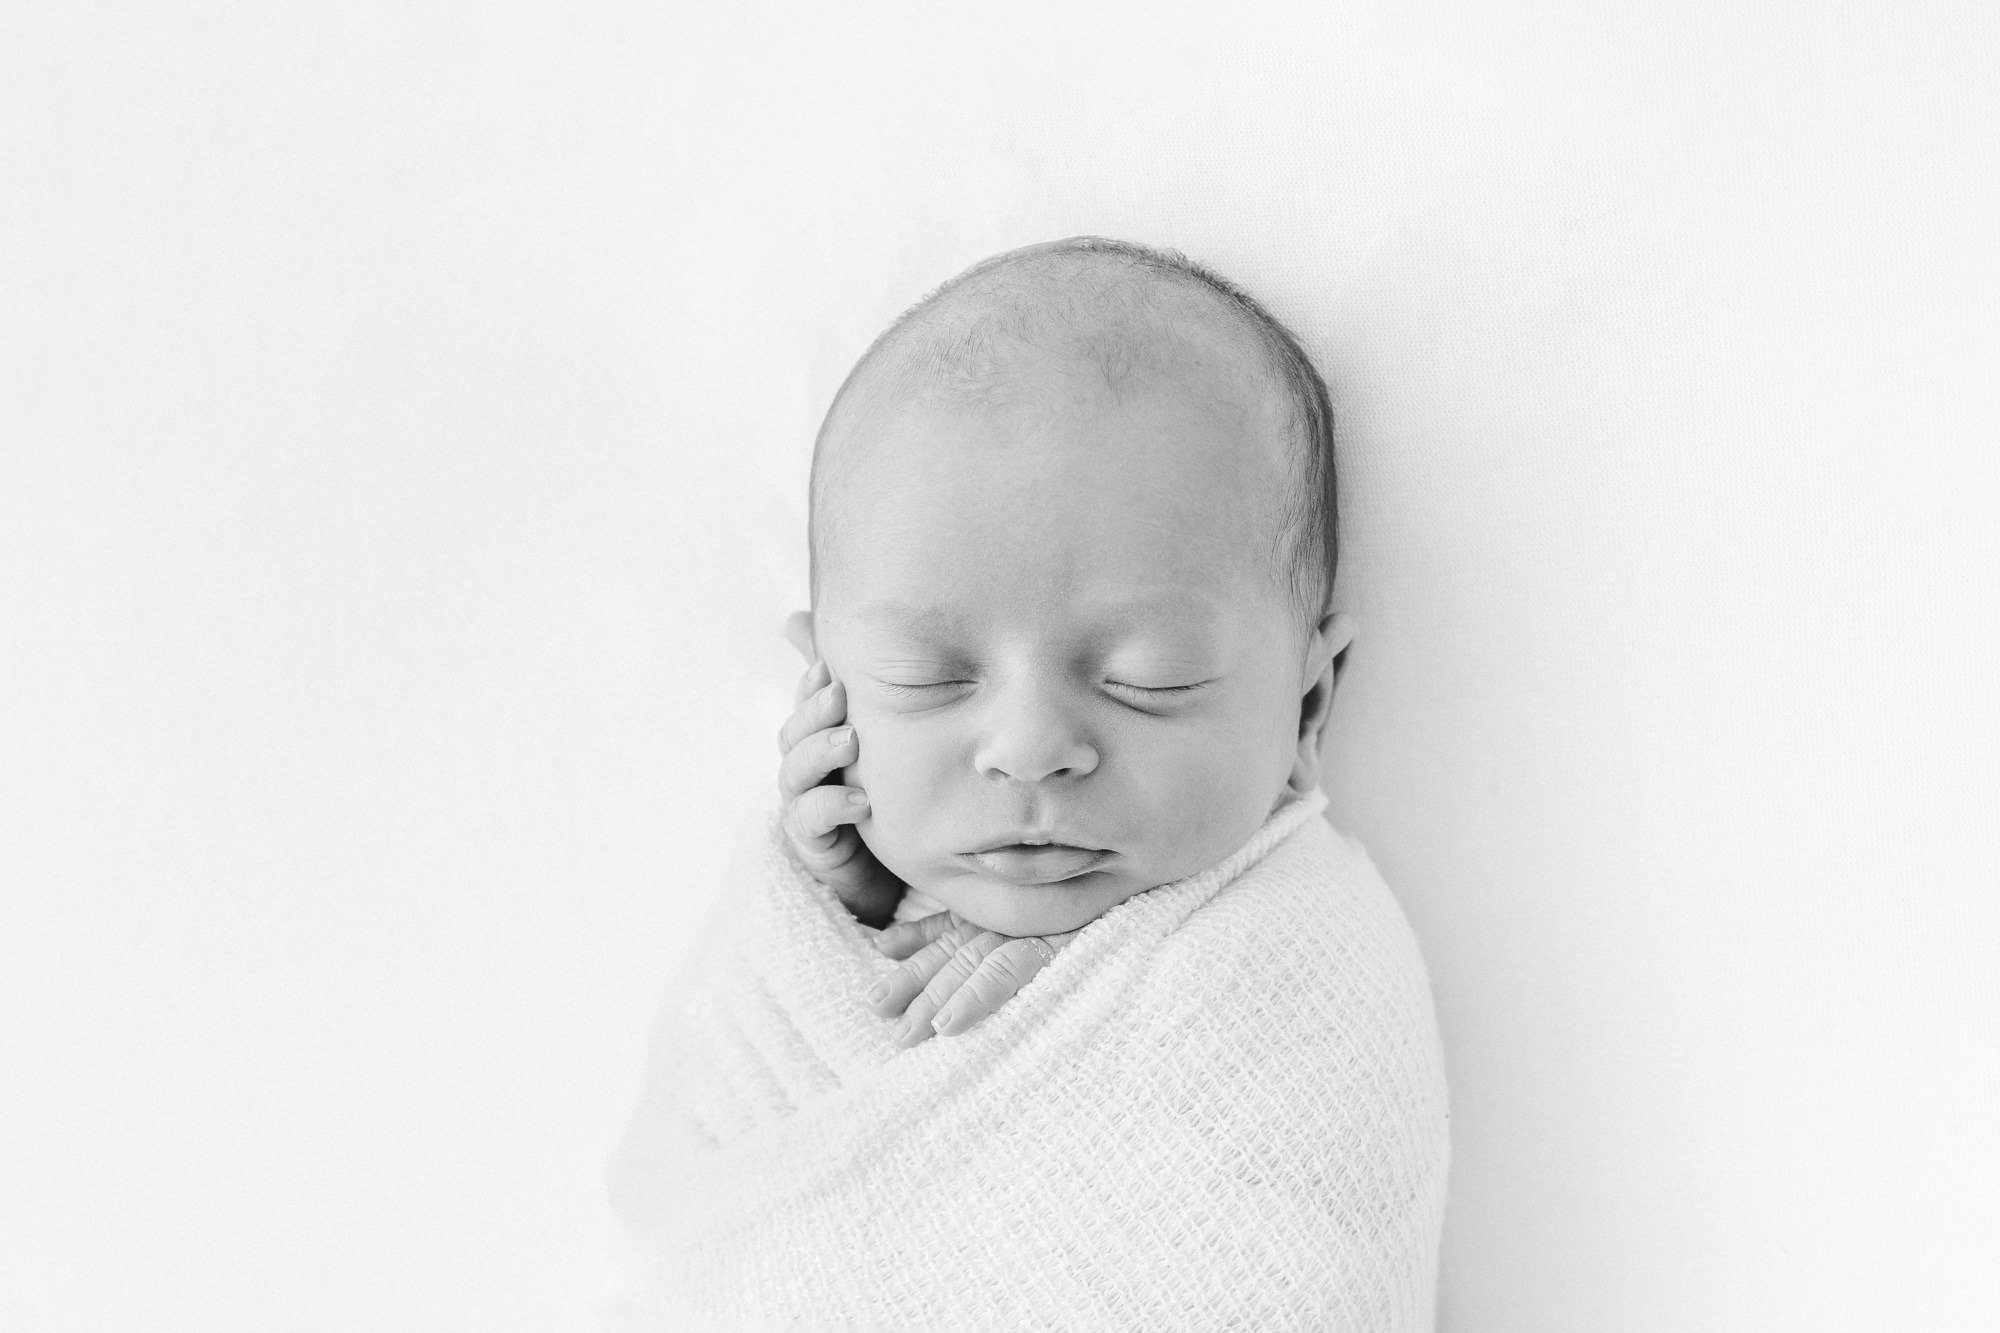  Captivating studio portrait of a newborn baby in black and white, showcasing the baby's peaceful pose with hands near their face captured by Nicole Hawkins photography. #NicoleHawkinsphotography #newbornportraits #NewJerseynewbornphotographer #NewJe